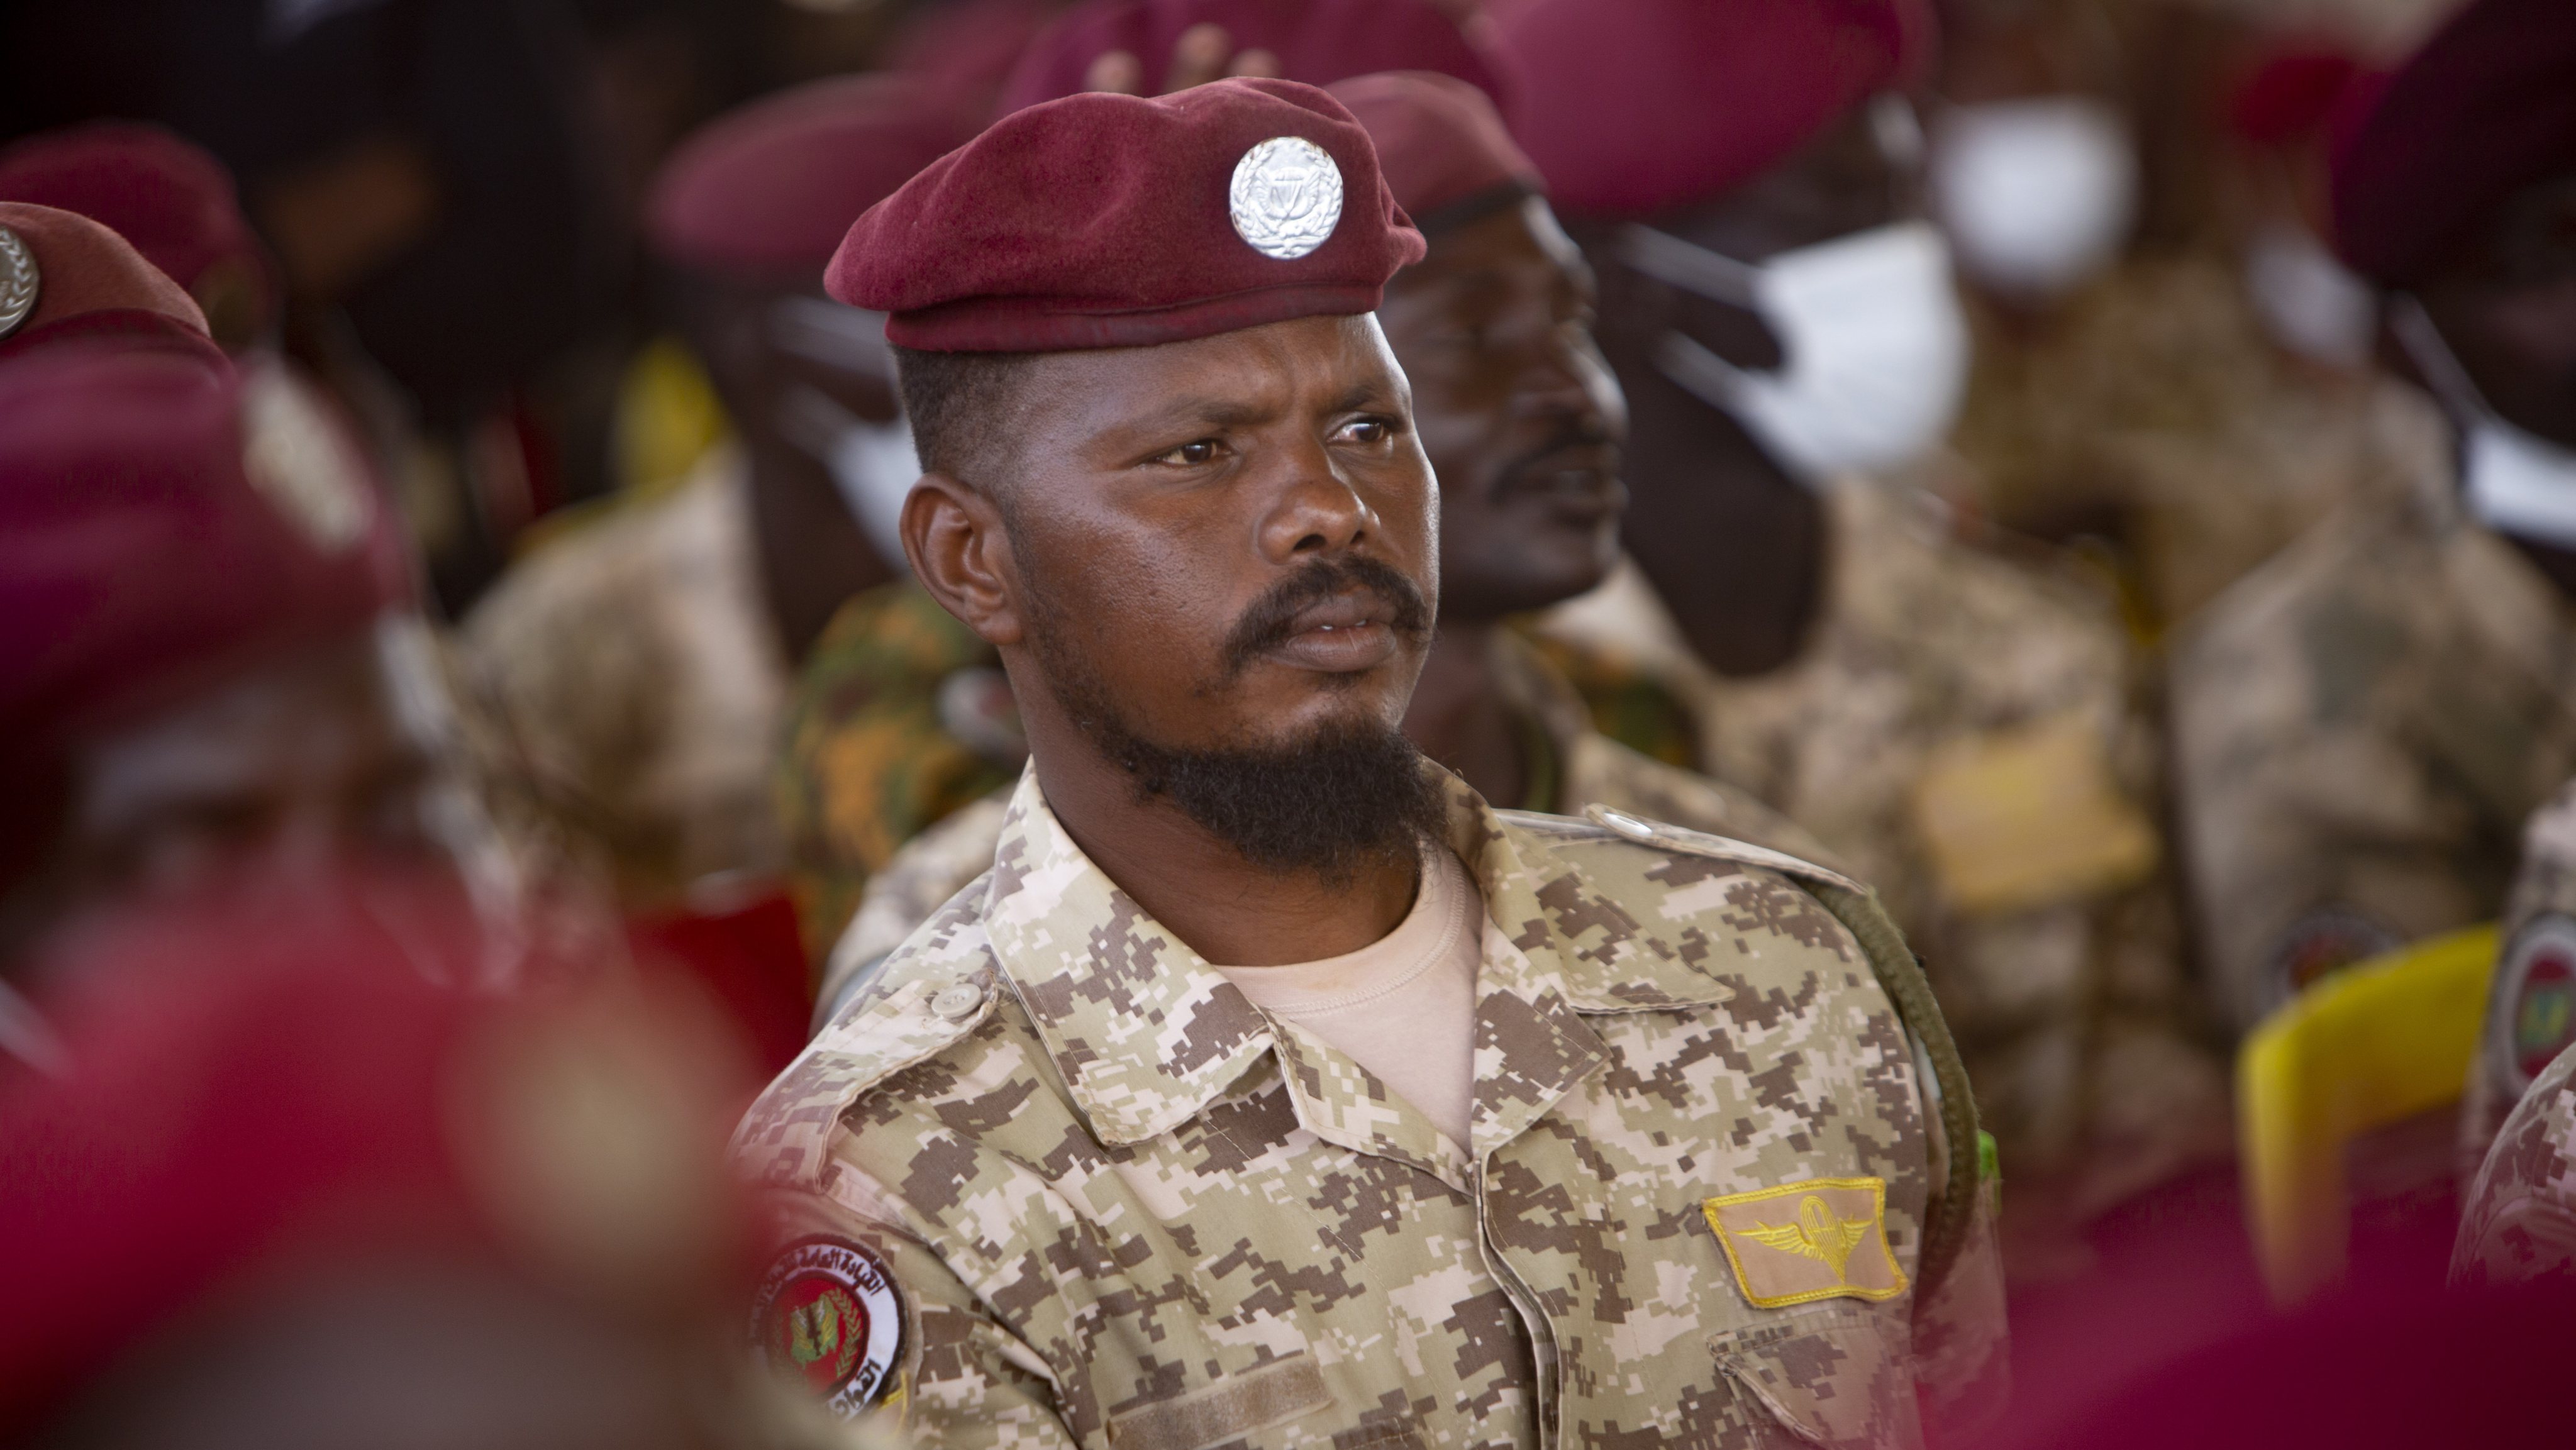 Sudanese general blames politicians for military coups in Sudan